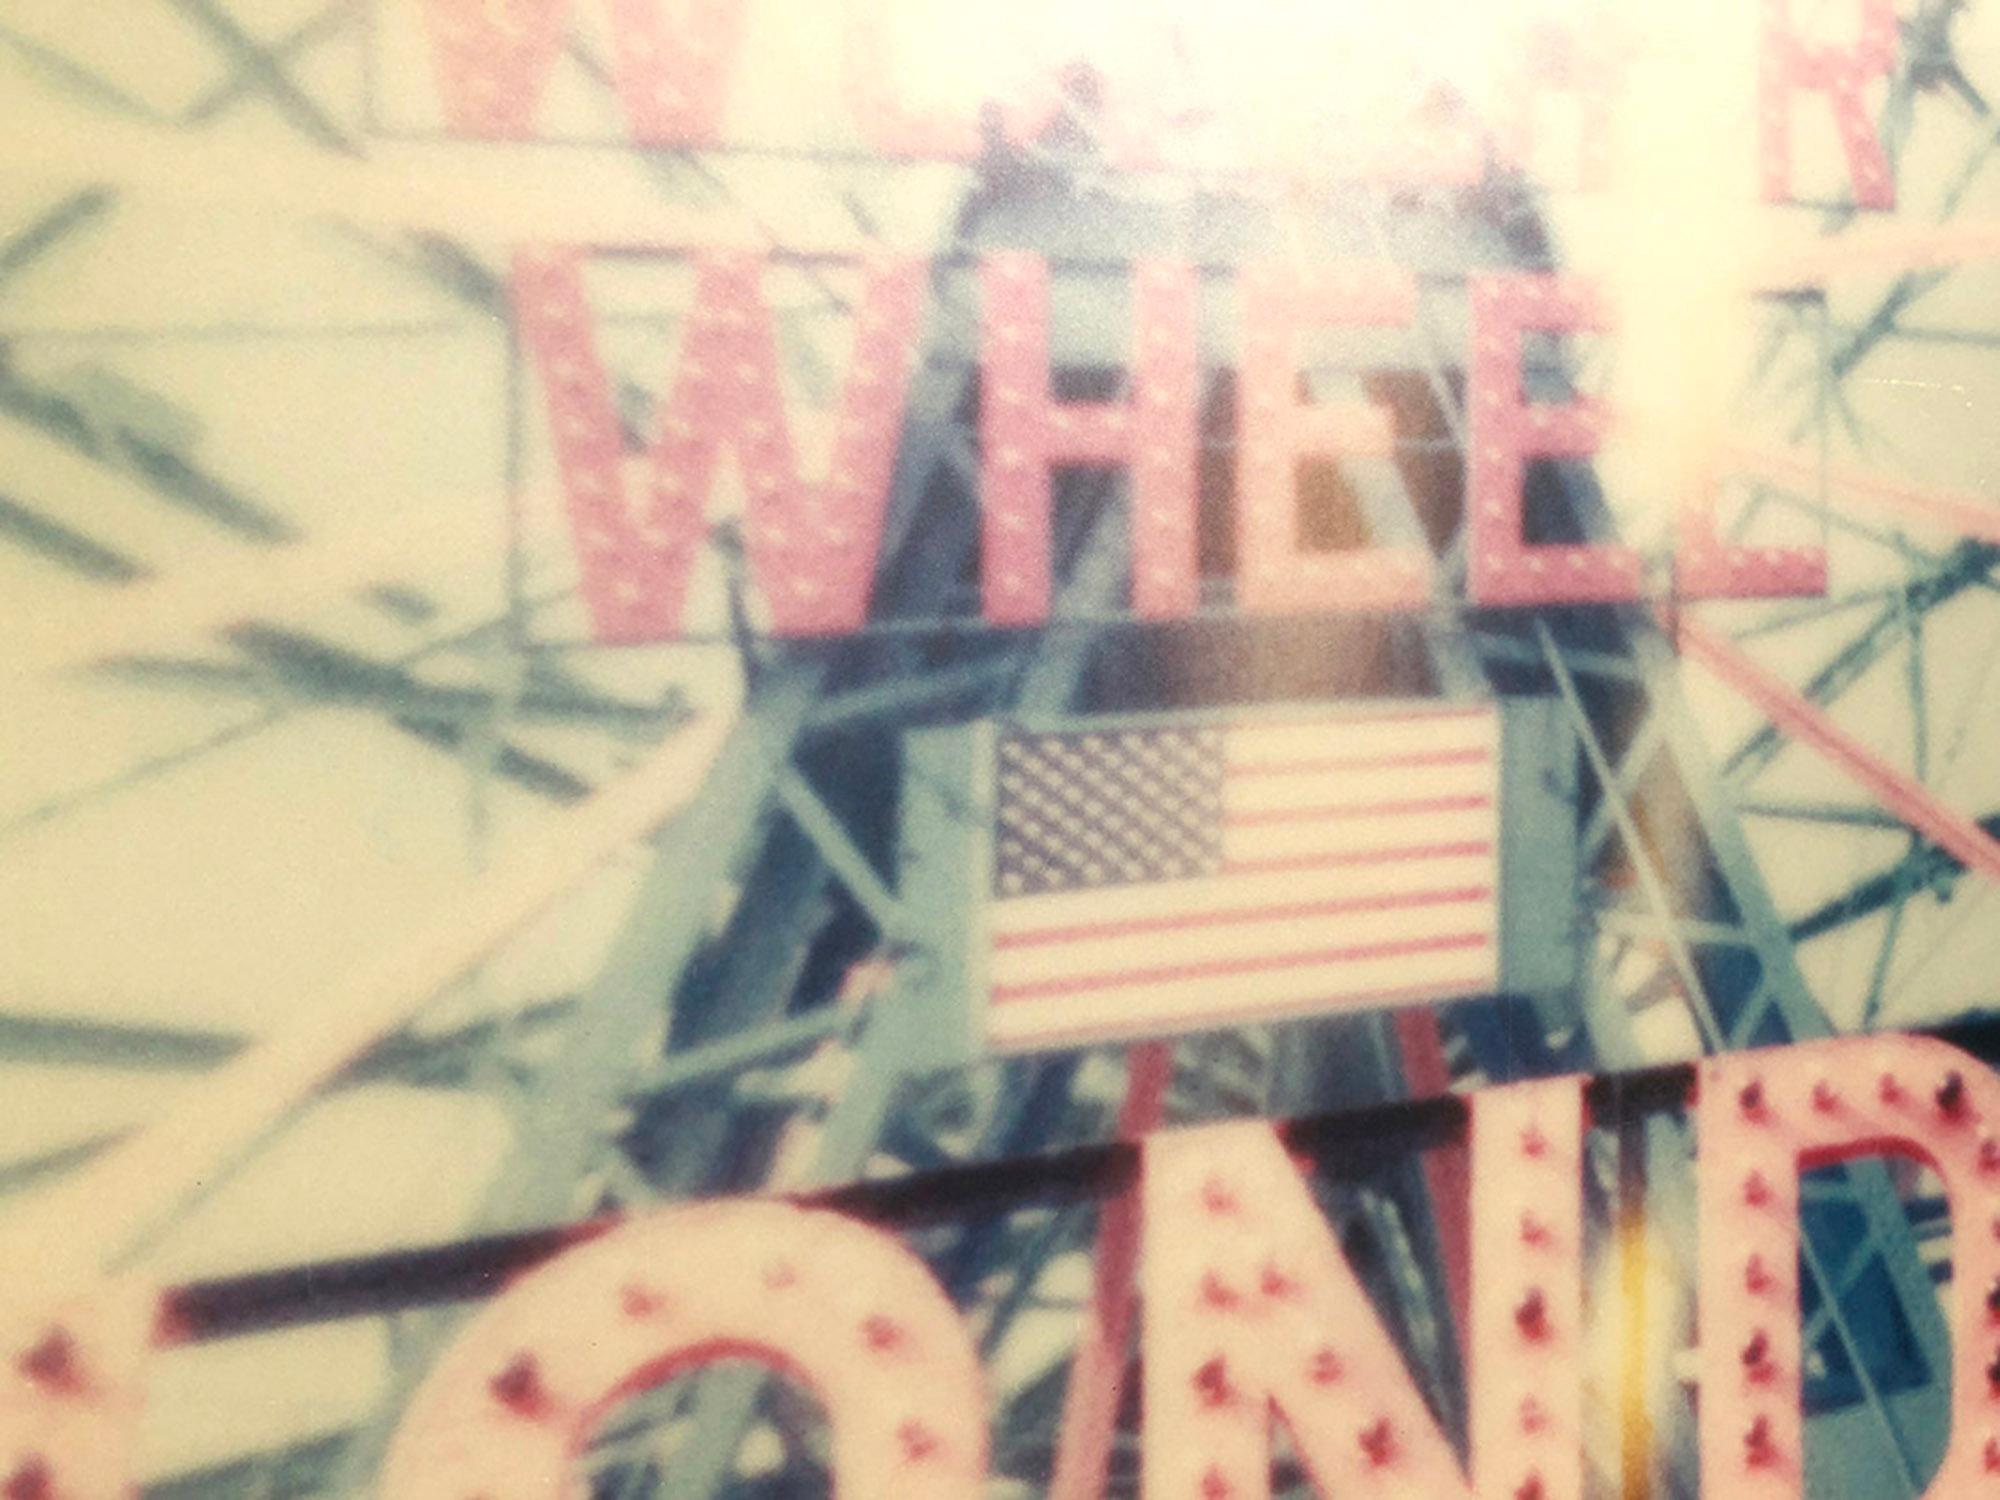 Wonder Wheel - Contemporary, Abstract, Landscape, Polaroid, expired, 21st For Sale 1